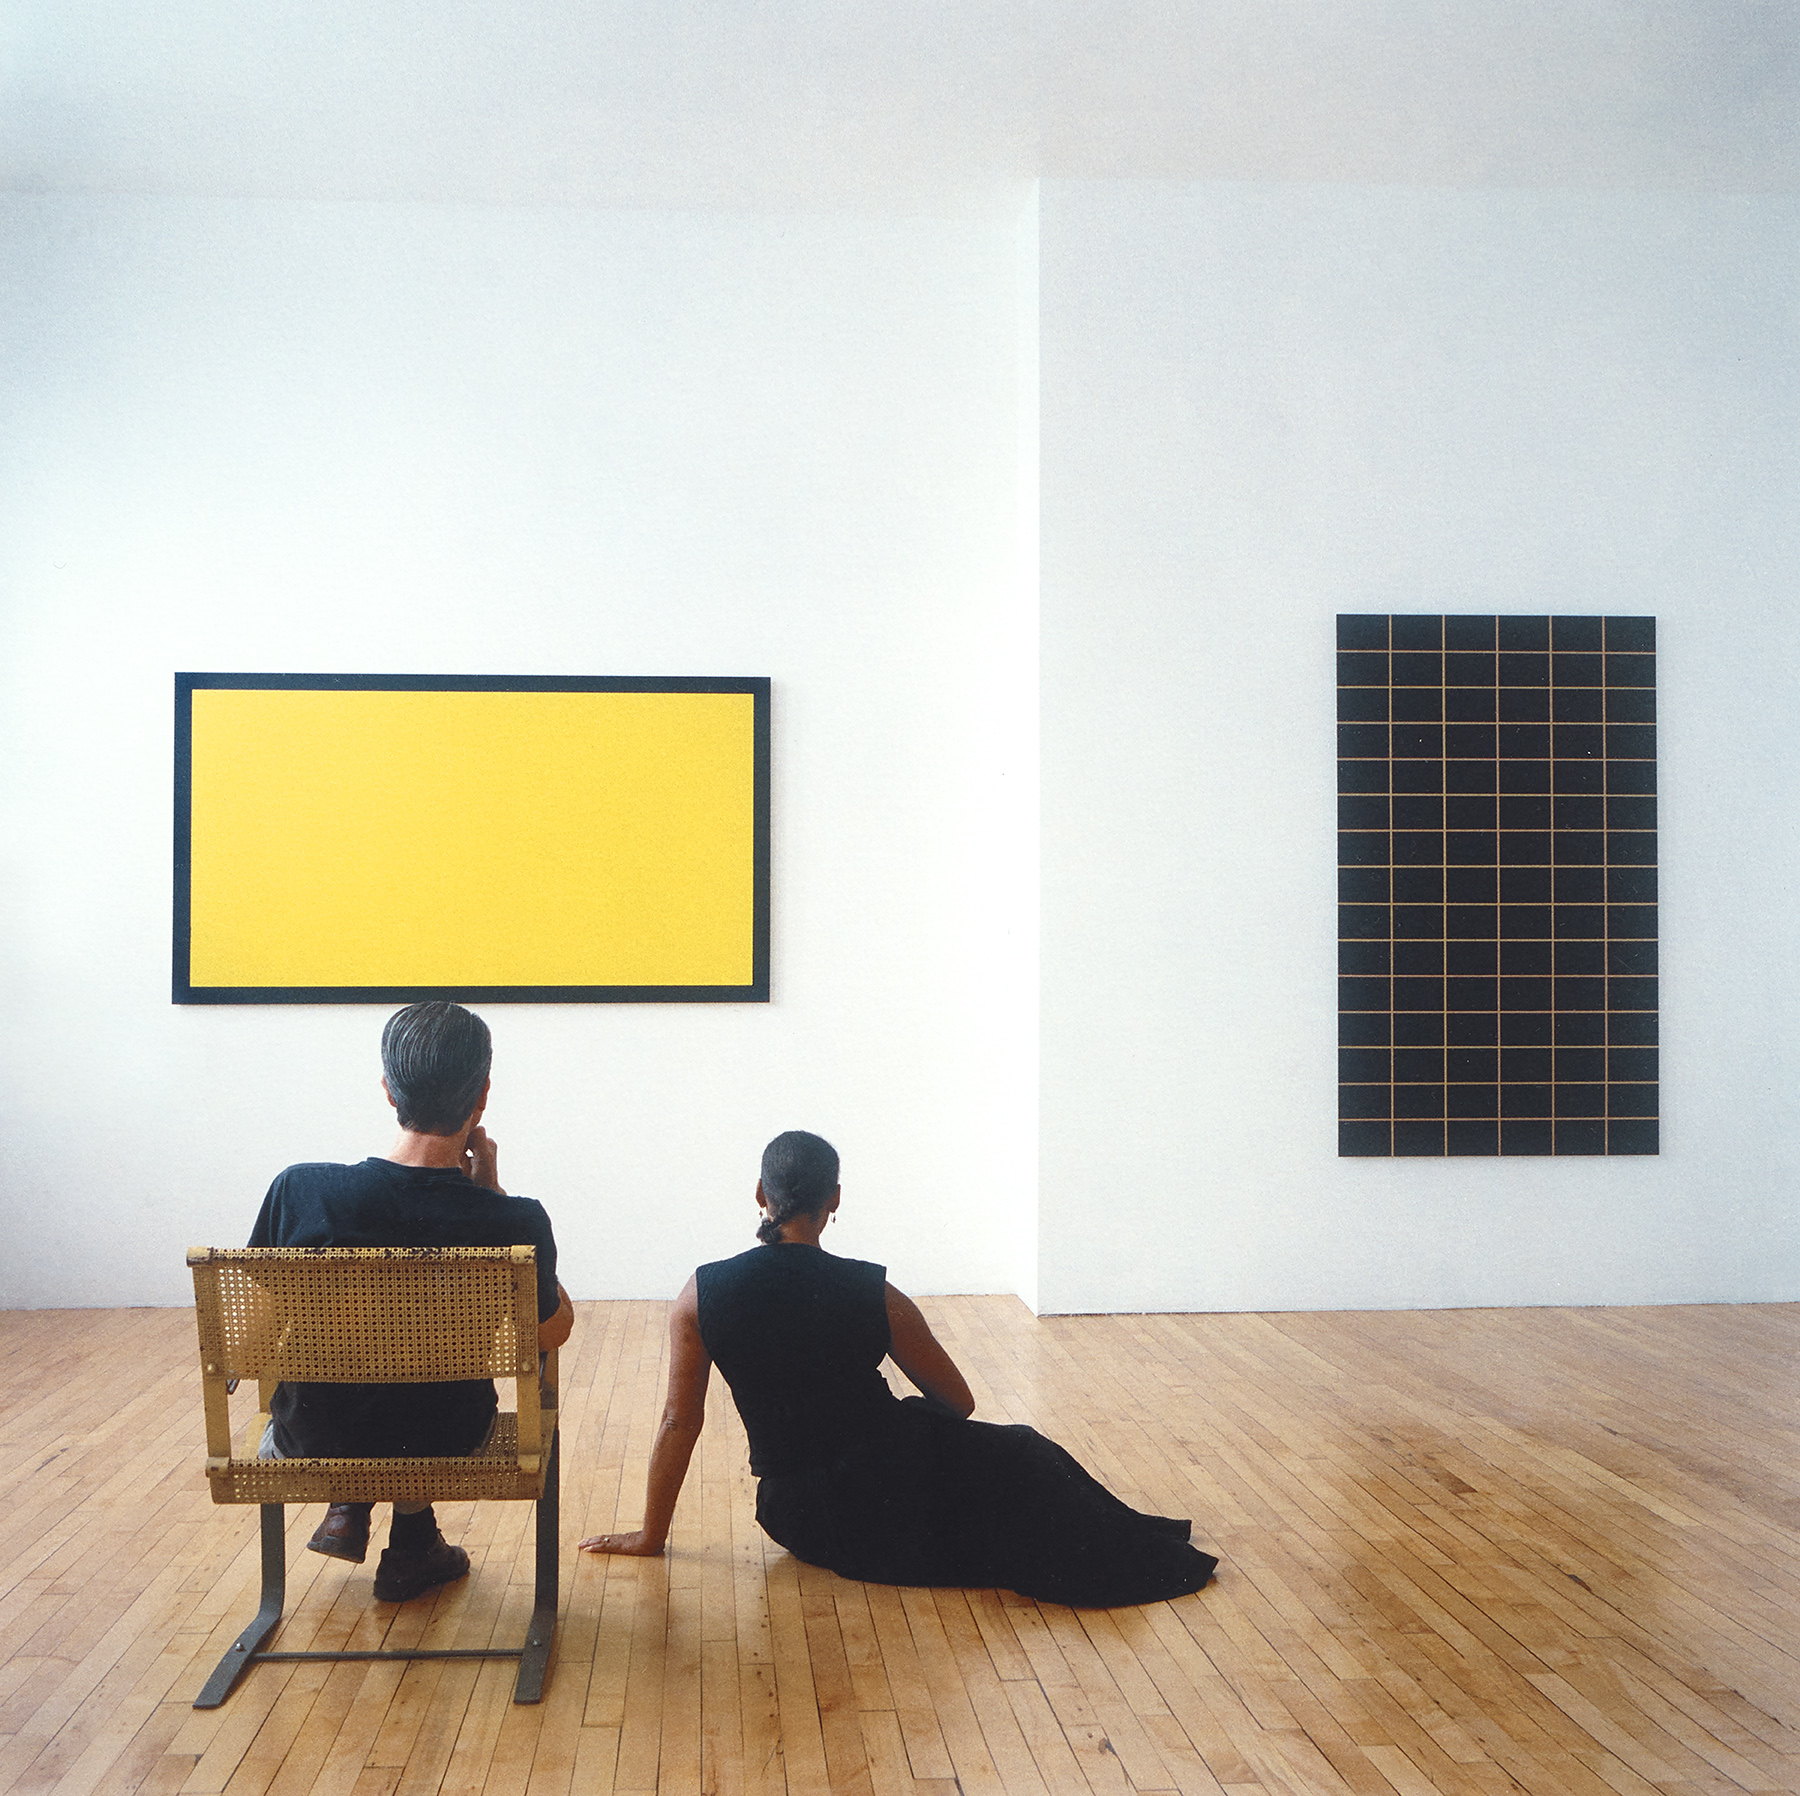 Detail view of Carrie Mae Weems' work Untitled Yellow Painting, 2003